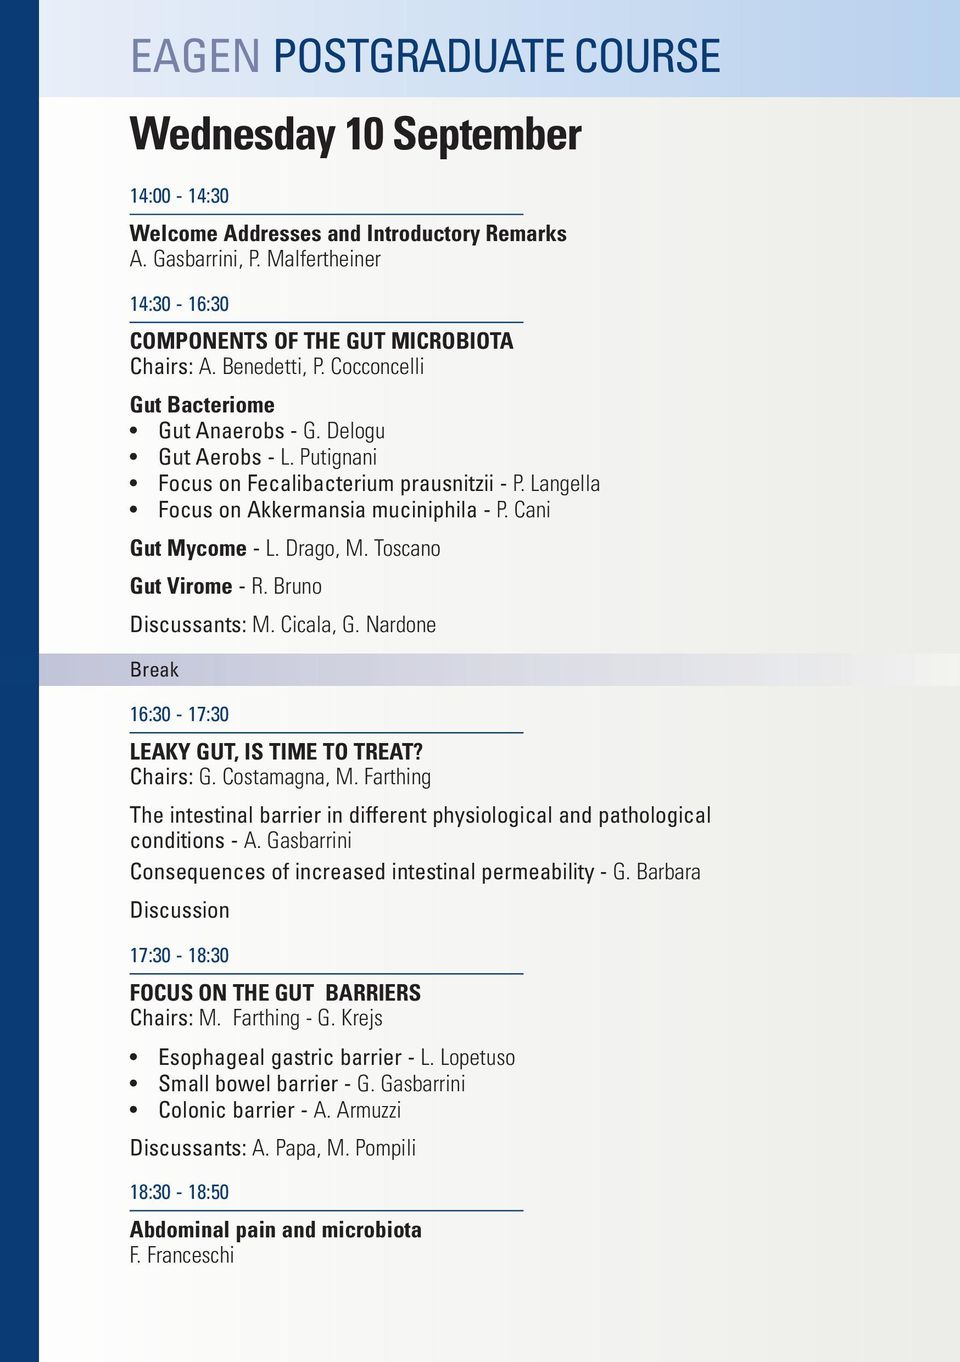 Cani Gut Mycome - L. Drago, M. Toscano Gut Virome - R. Bruno Discussants: M. Cicala, G. Nardone Break 16:30-17:30 LEAKY GUT, IS TIME TO TREAT? Chairs: G. Costamagna, M.